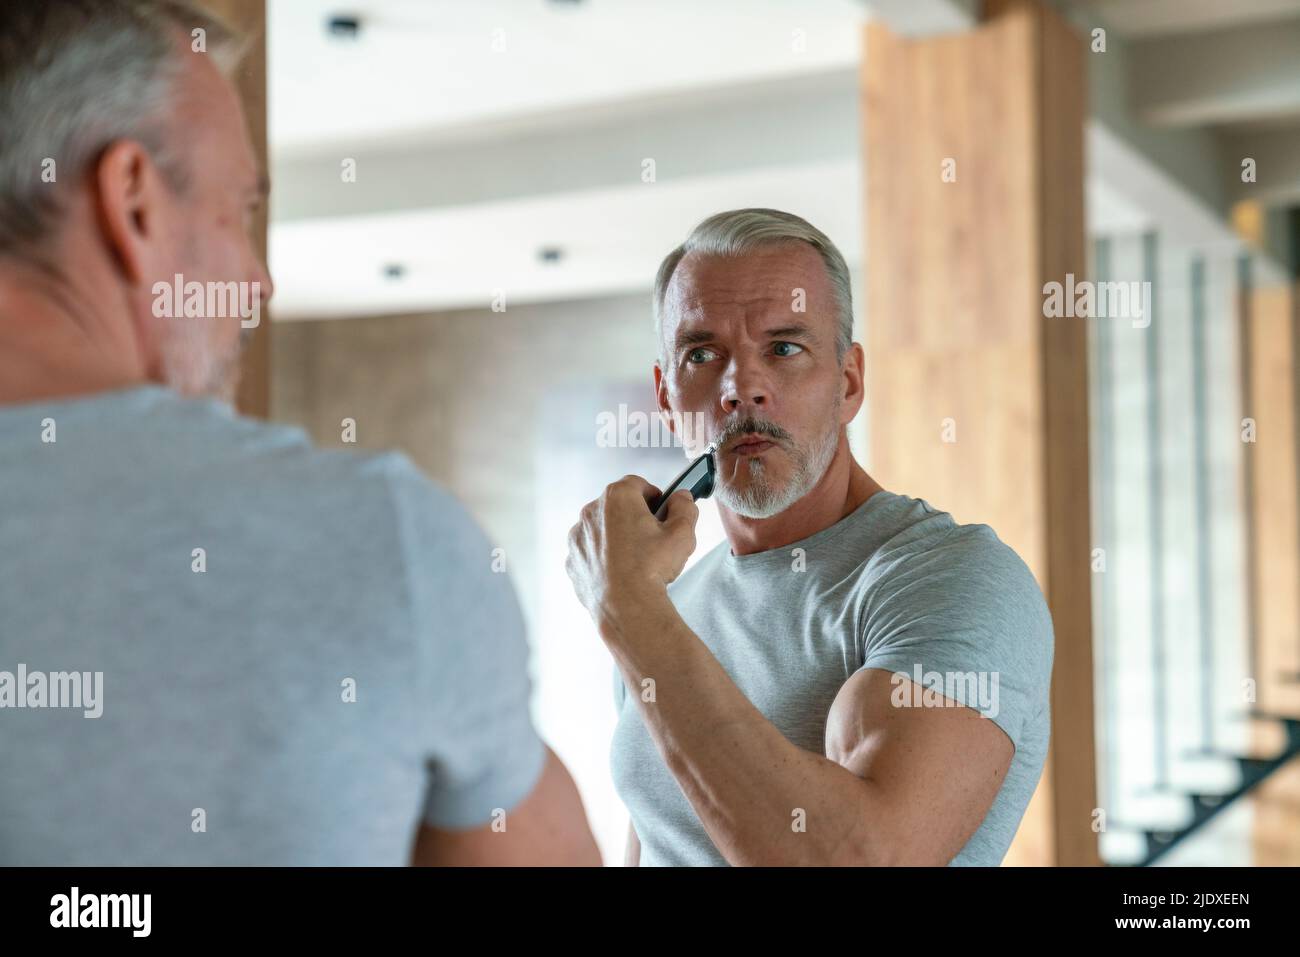 Man shaving with electric razor at home Stock Photo